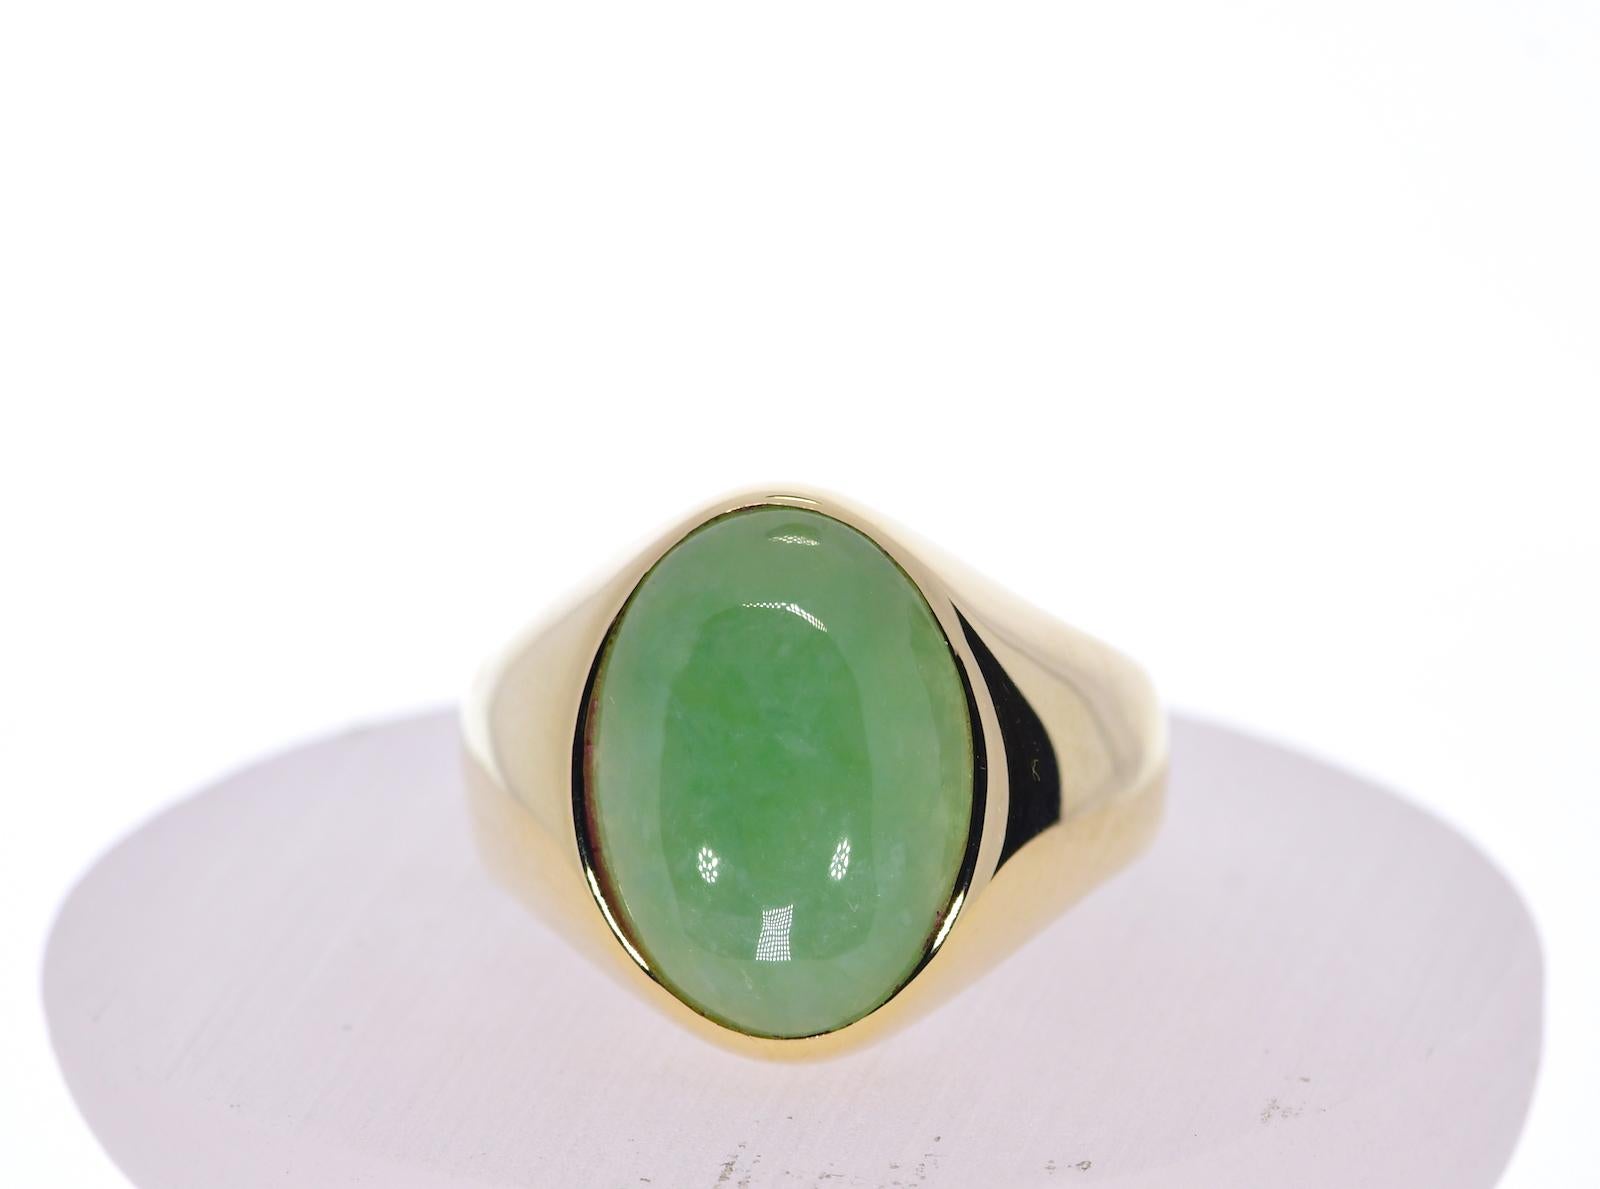 Oval Green Jade in 14k Yellow Gold 12 grams

Stone: Jade   Color: Mossy Green Semi Translucent    Shape:  Oval
Metal: Yellow Gold
Purity: 14k
Total Gram Weight: 12
Ring Size 12 ( Please Inquire For Additional Sizing)   


JESSUP'S PRICE: